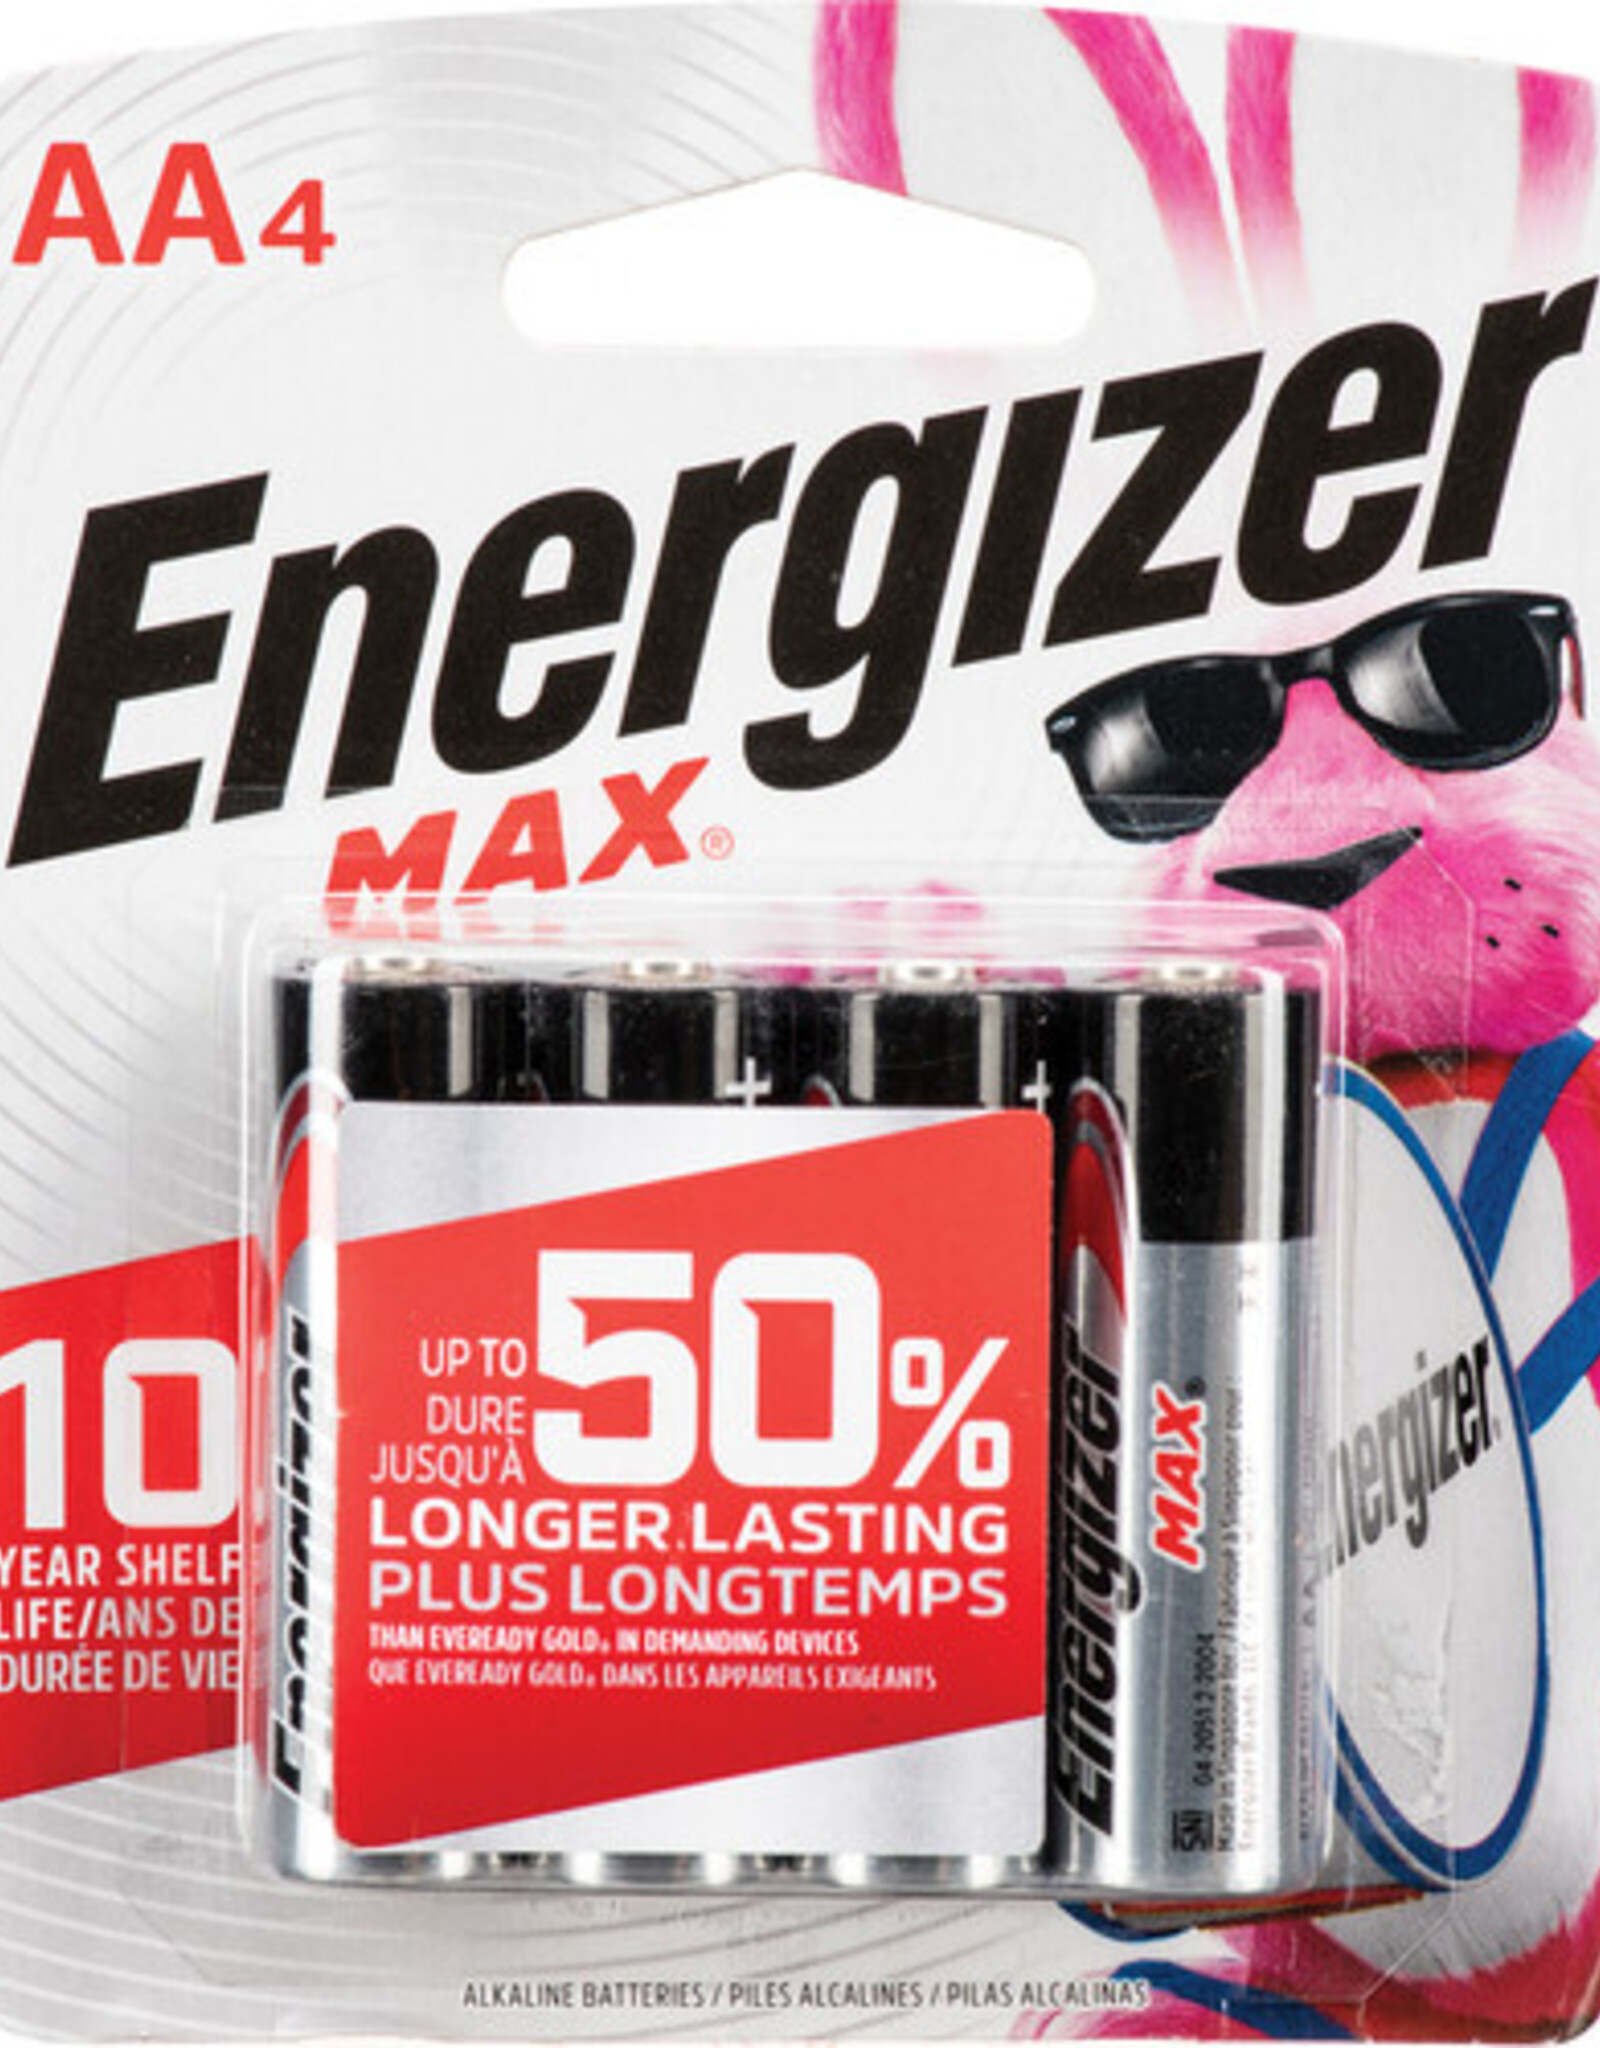 ENERGIZER ENERGIZER MAX AA BATTERIES 4 PACK